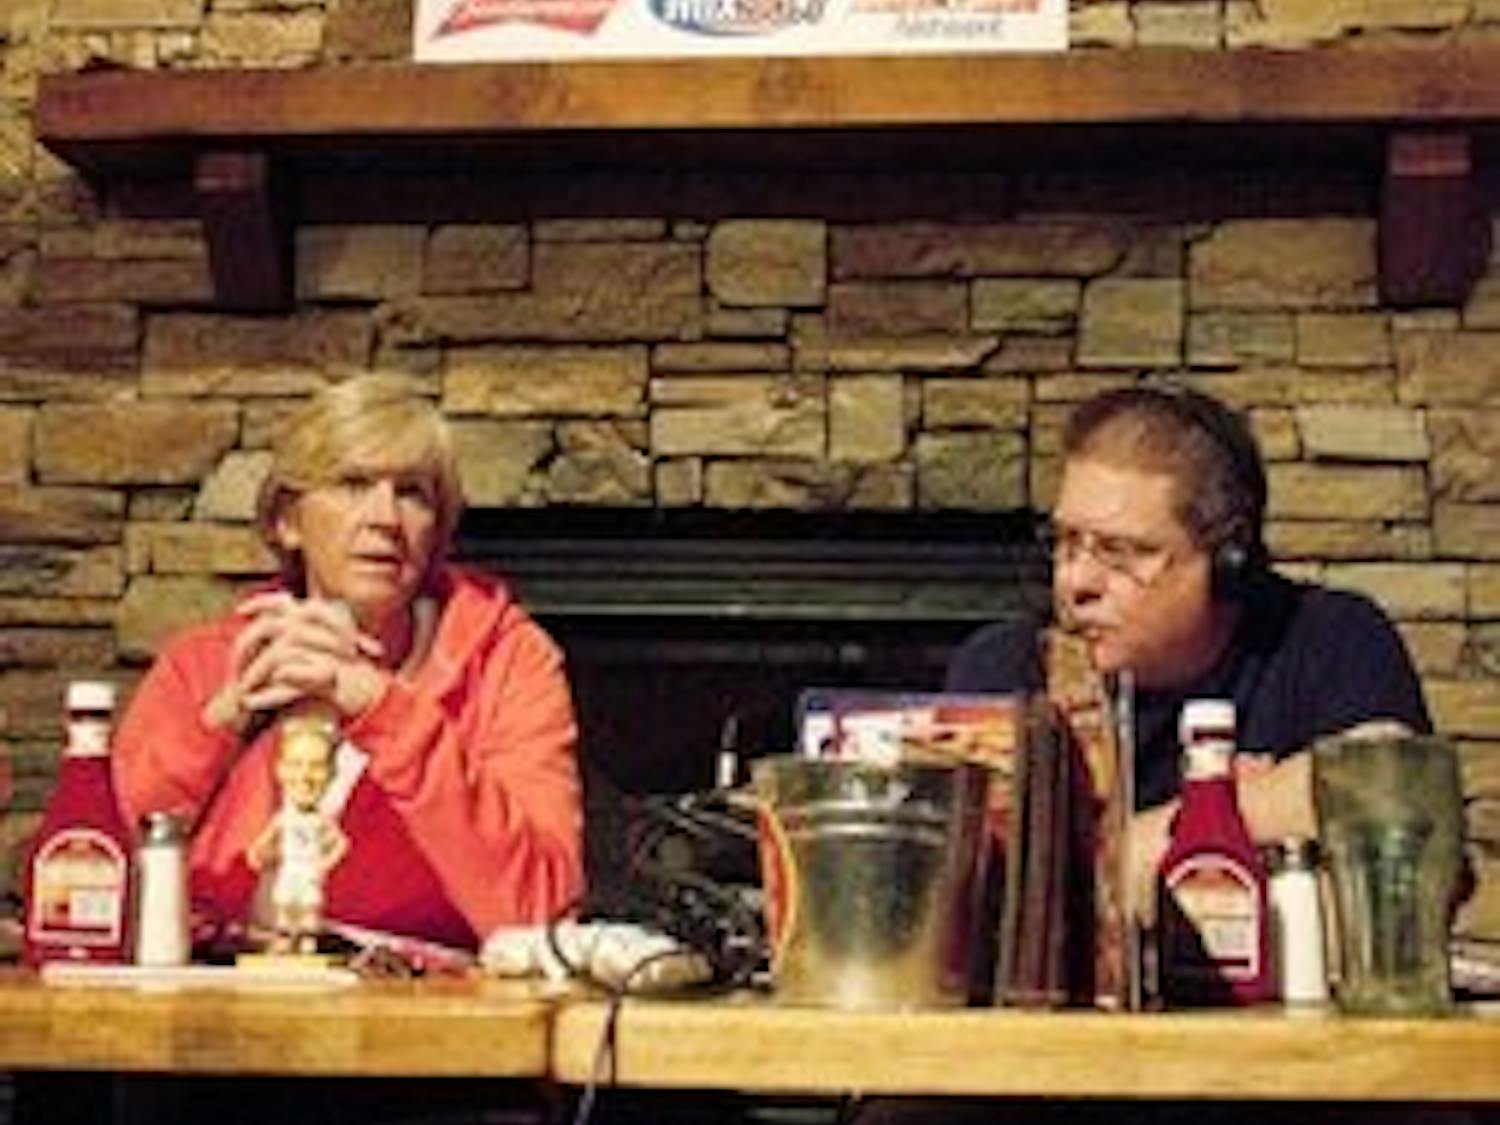 Women's basketball coach Nell Fortner talks on her radio show at Logan's with Mix 96.7's Andy Burcham. (Emily Adams / Photo Editor)